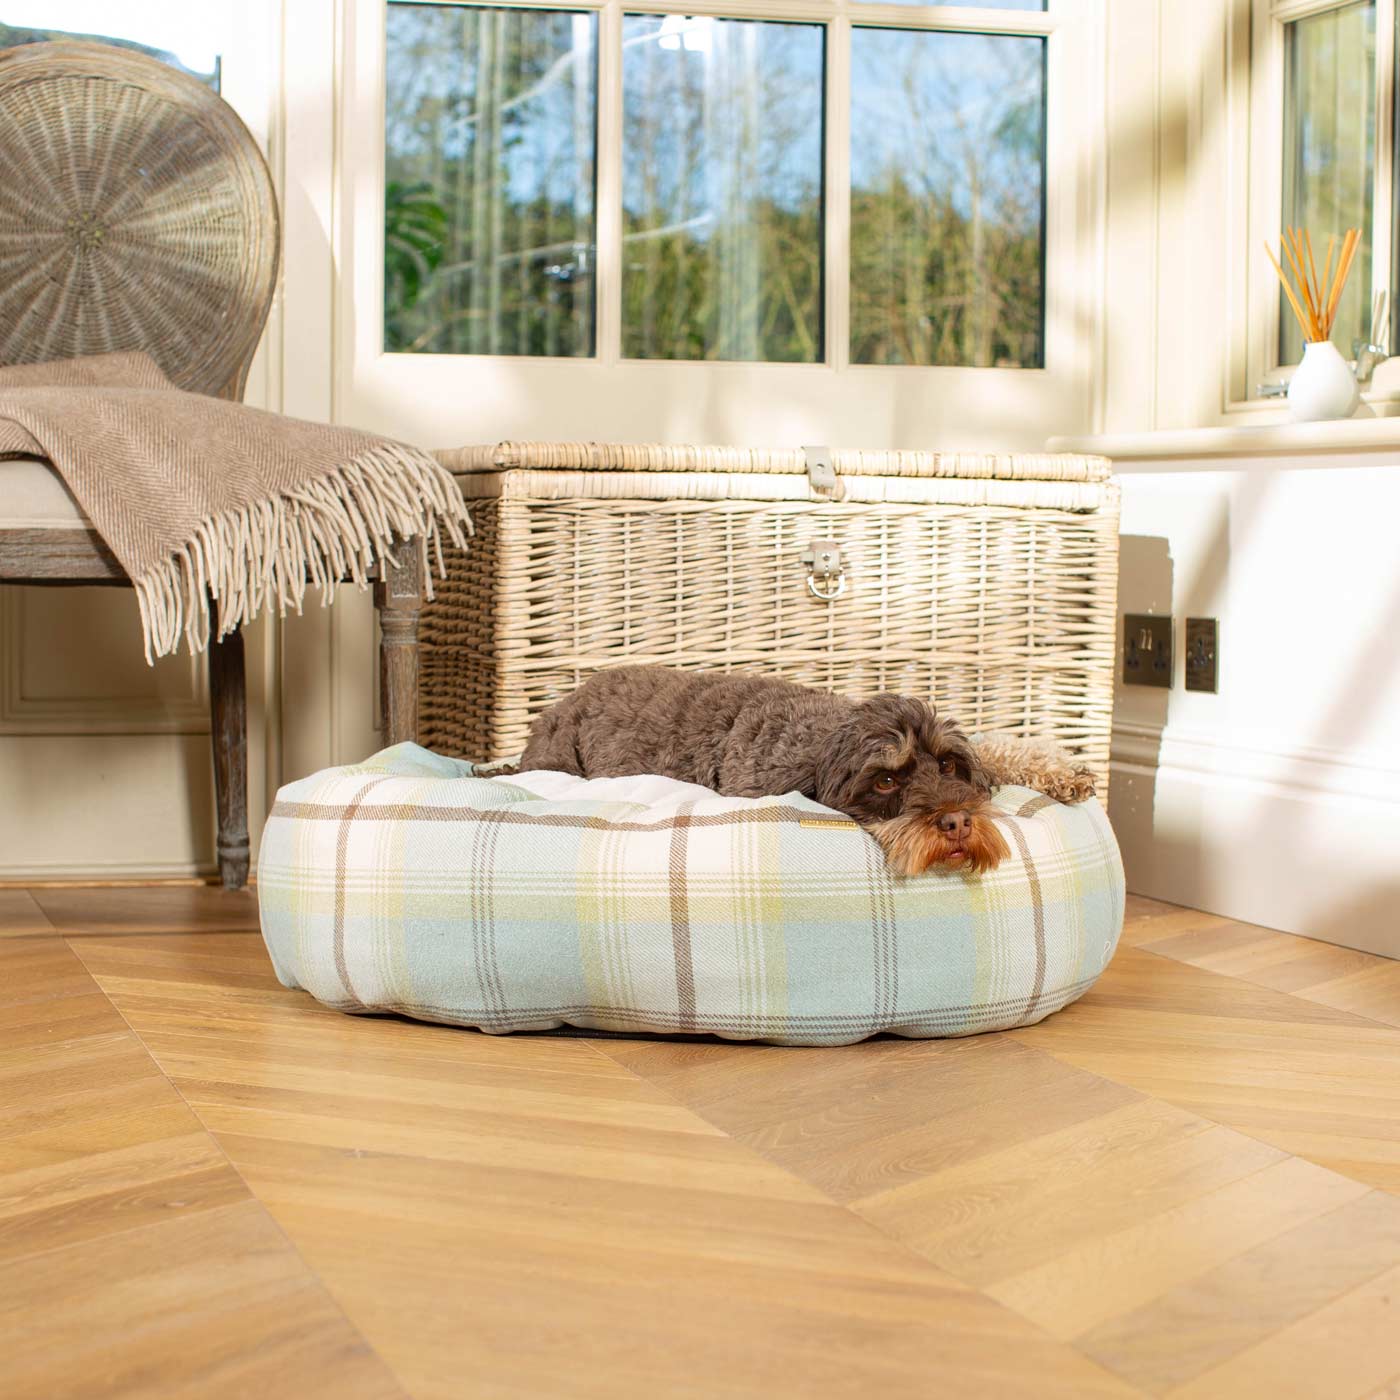 Discover Our Handmade Luxury Donut Dog Bed, In Duck Egg Tweed, The Perfect Choice For Puppies Available Now at Lords & Labradors 